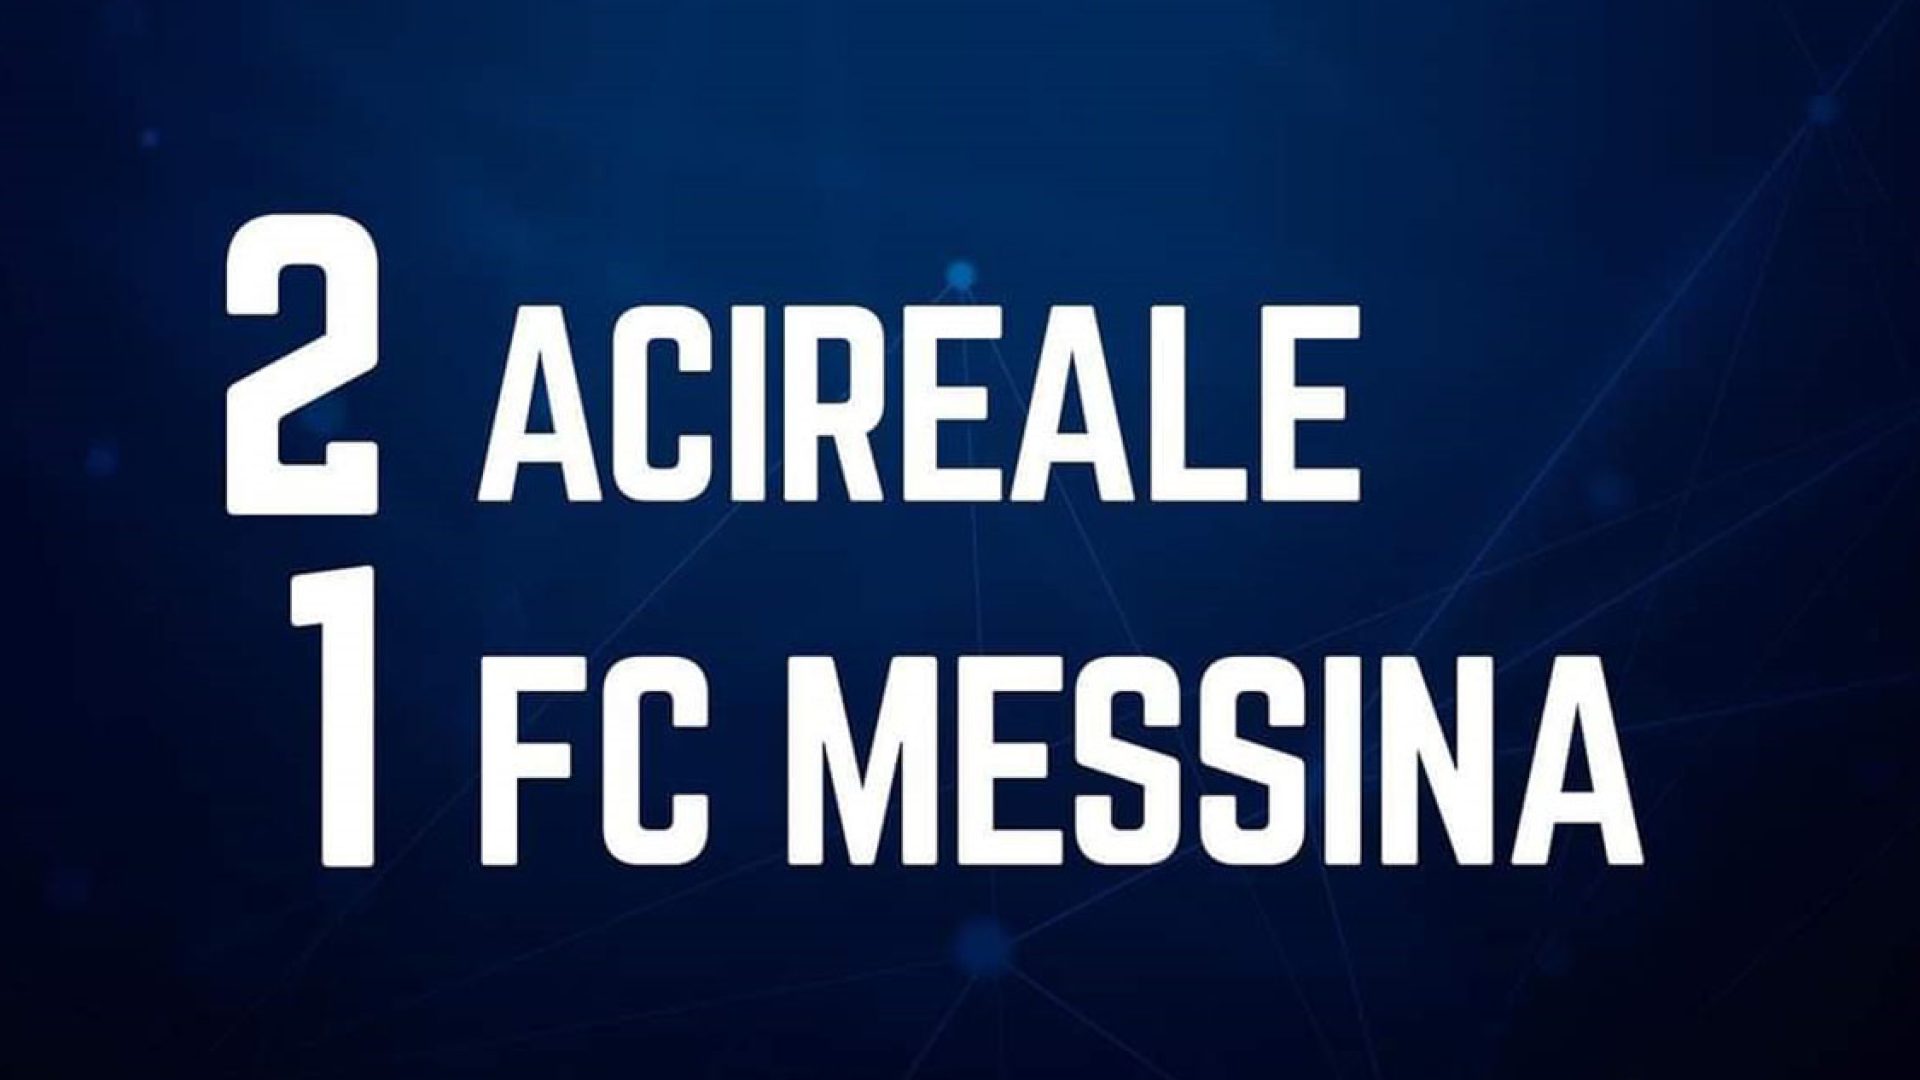 Acereale-Messina